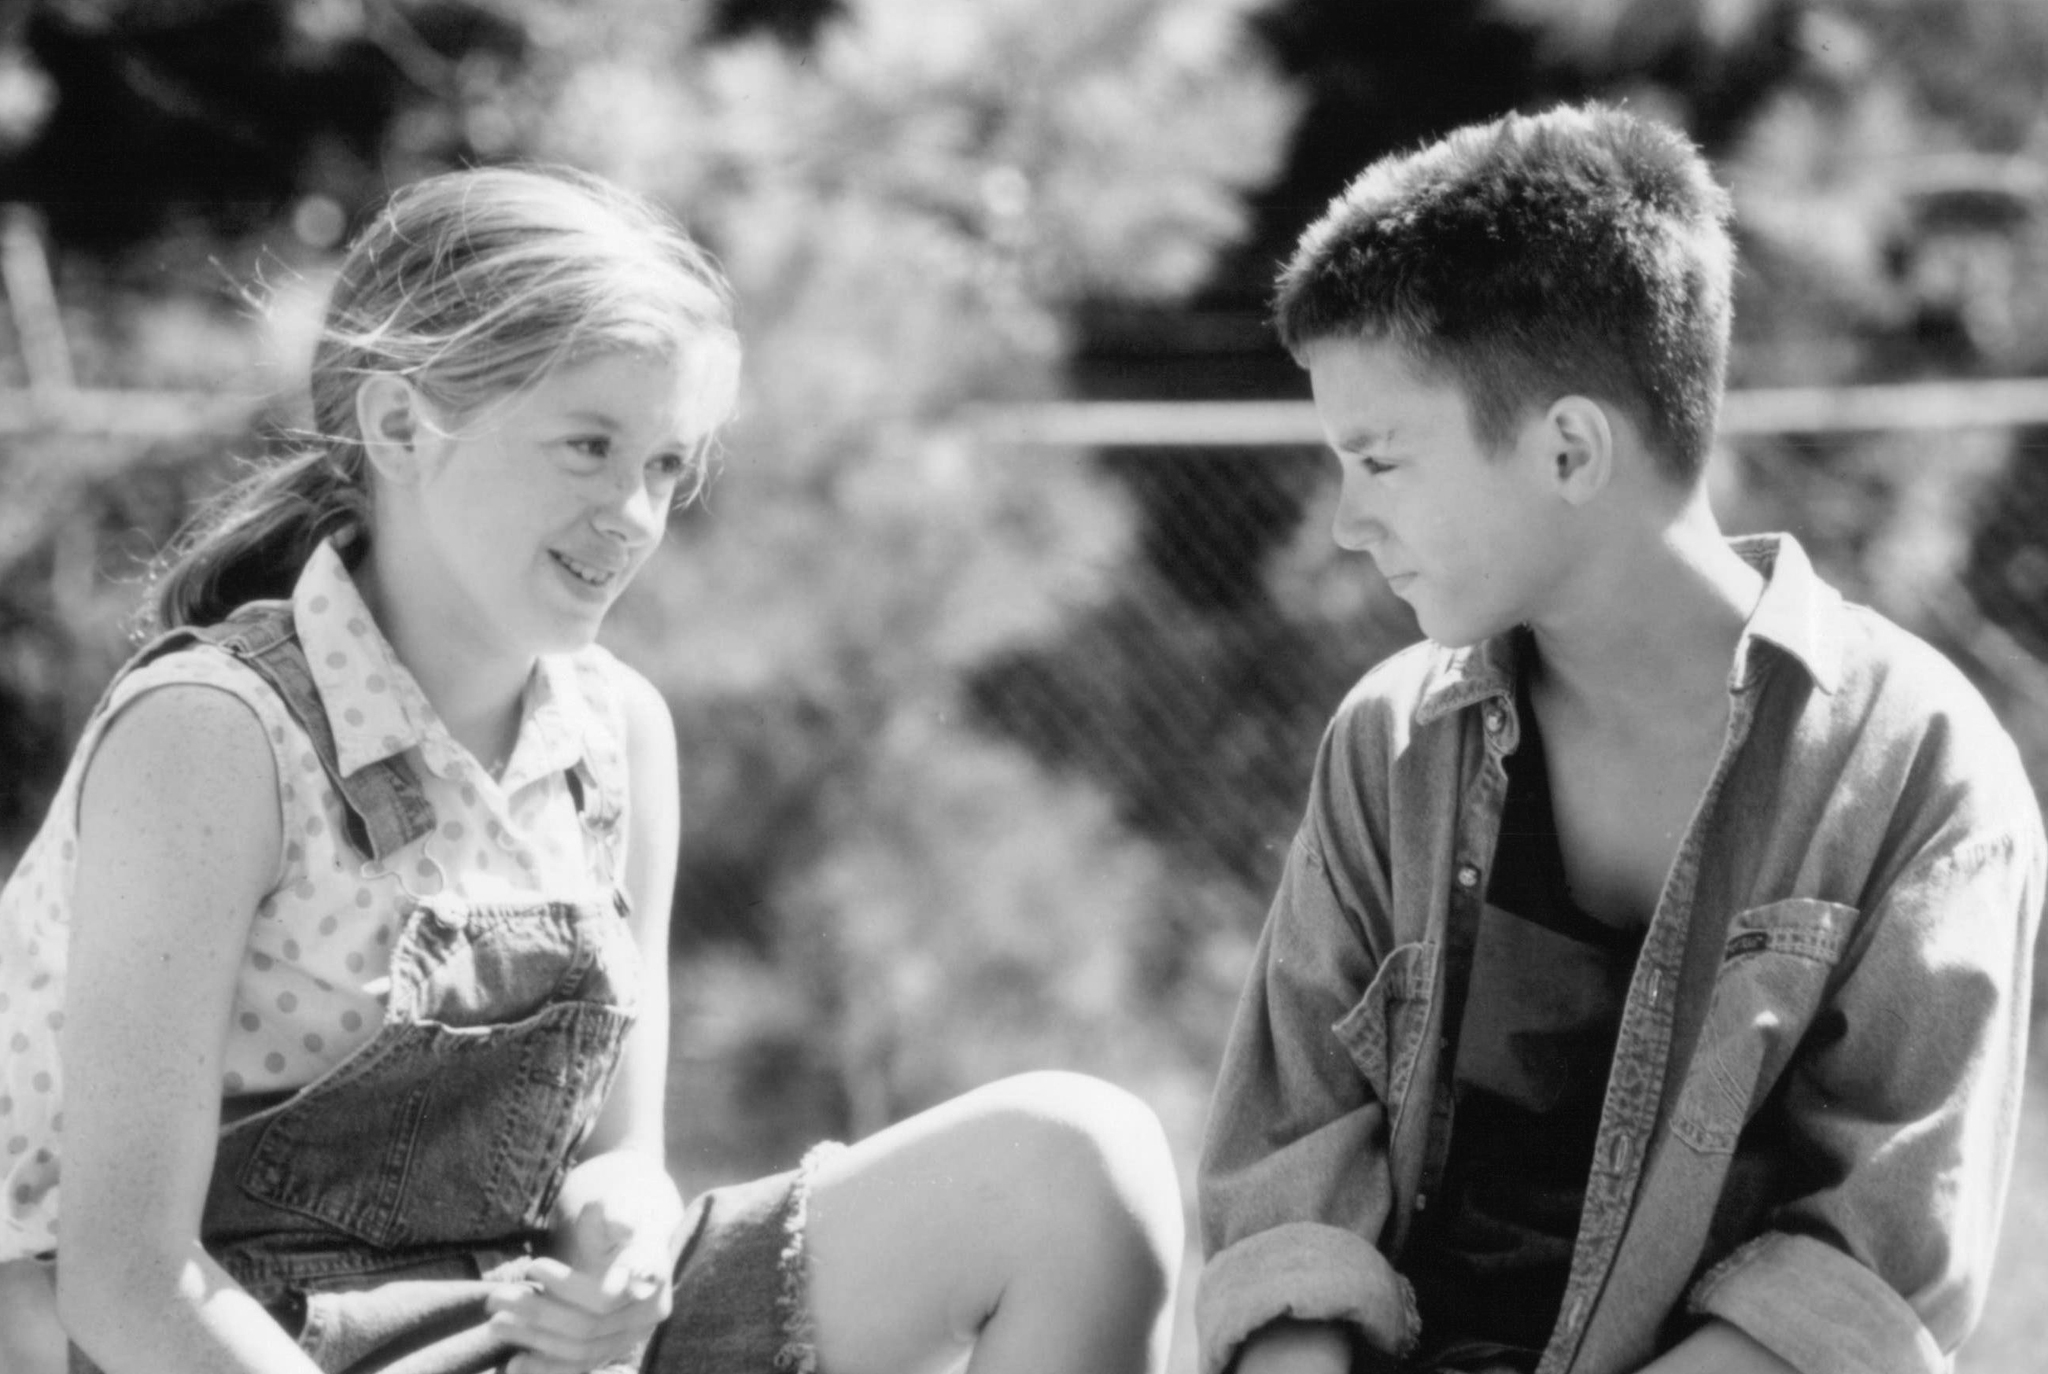 Still of Elijah Wood and Lexi Randall in The War (1994)